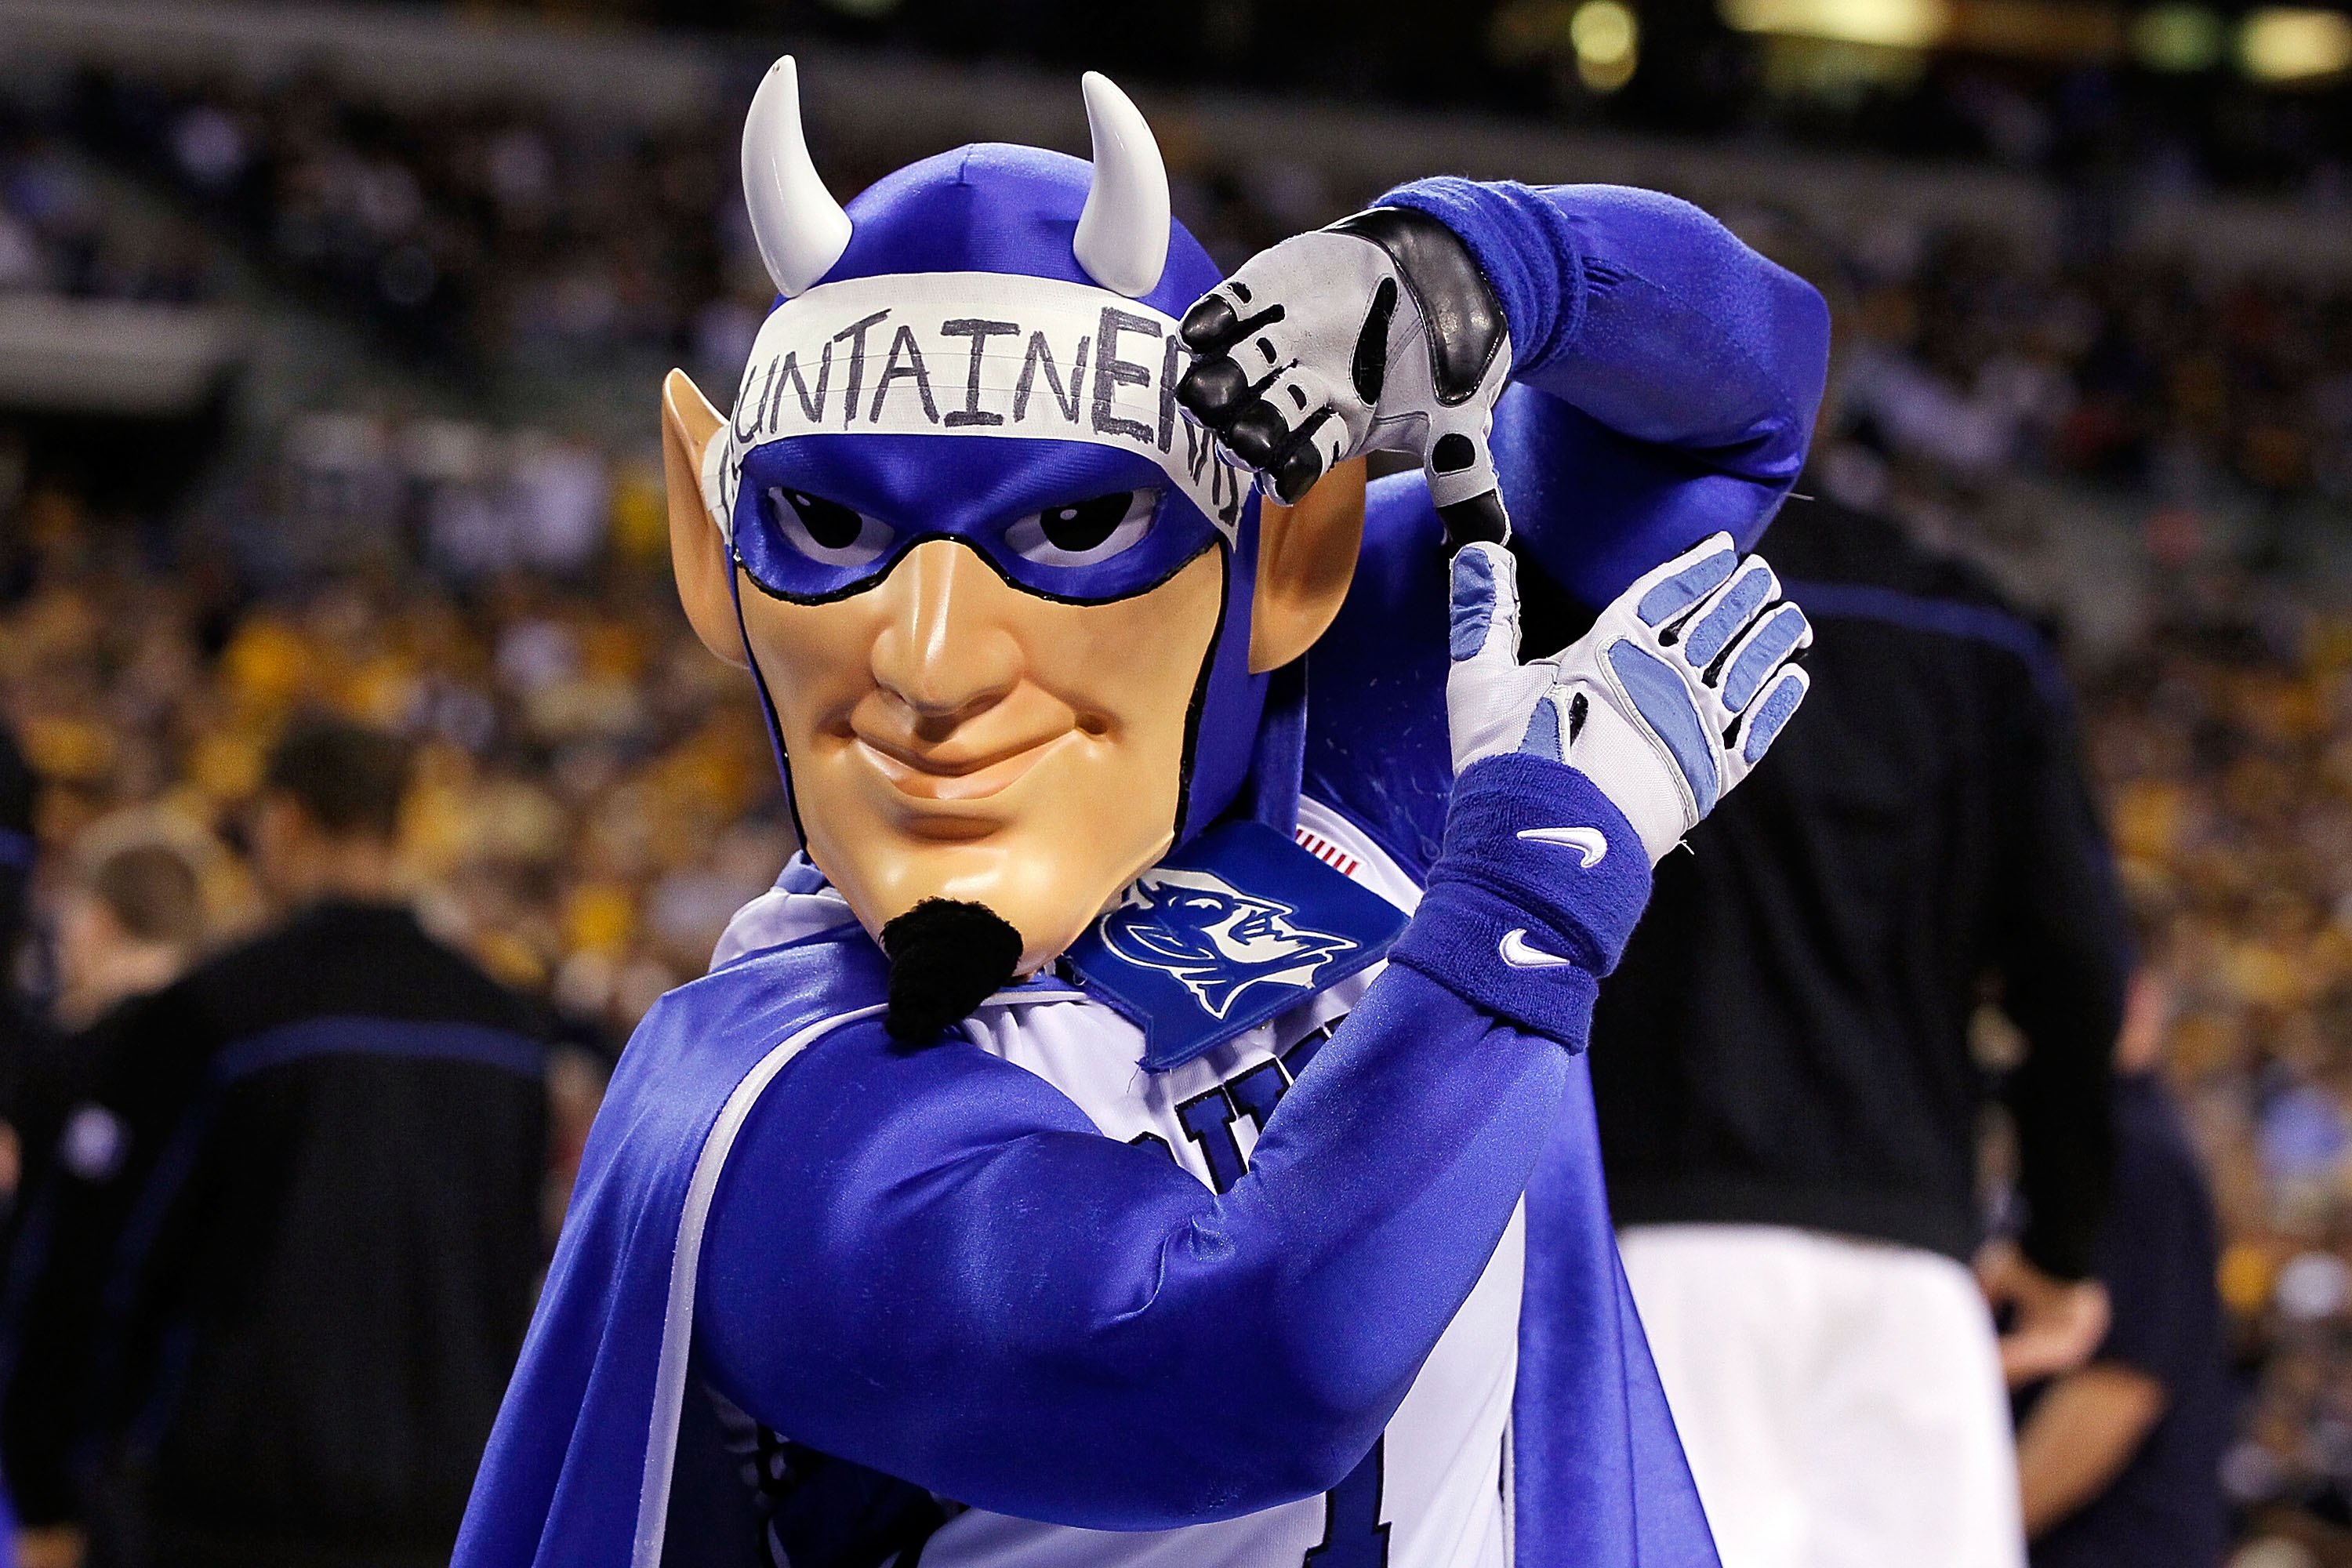 INDIANAPOLIS - APRIL 03:  The mascot for the Duke Blue Devils performs during a break in the game against the West Virginia Mountaineers during the National Semifinal game of the 2010 NCAA Division I Men's Basketball Championship at Lucas Oil Stadium on A